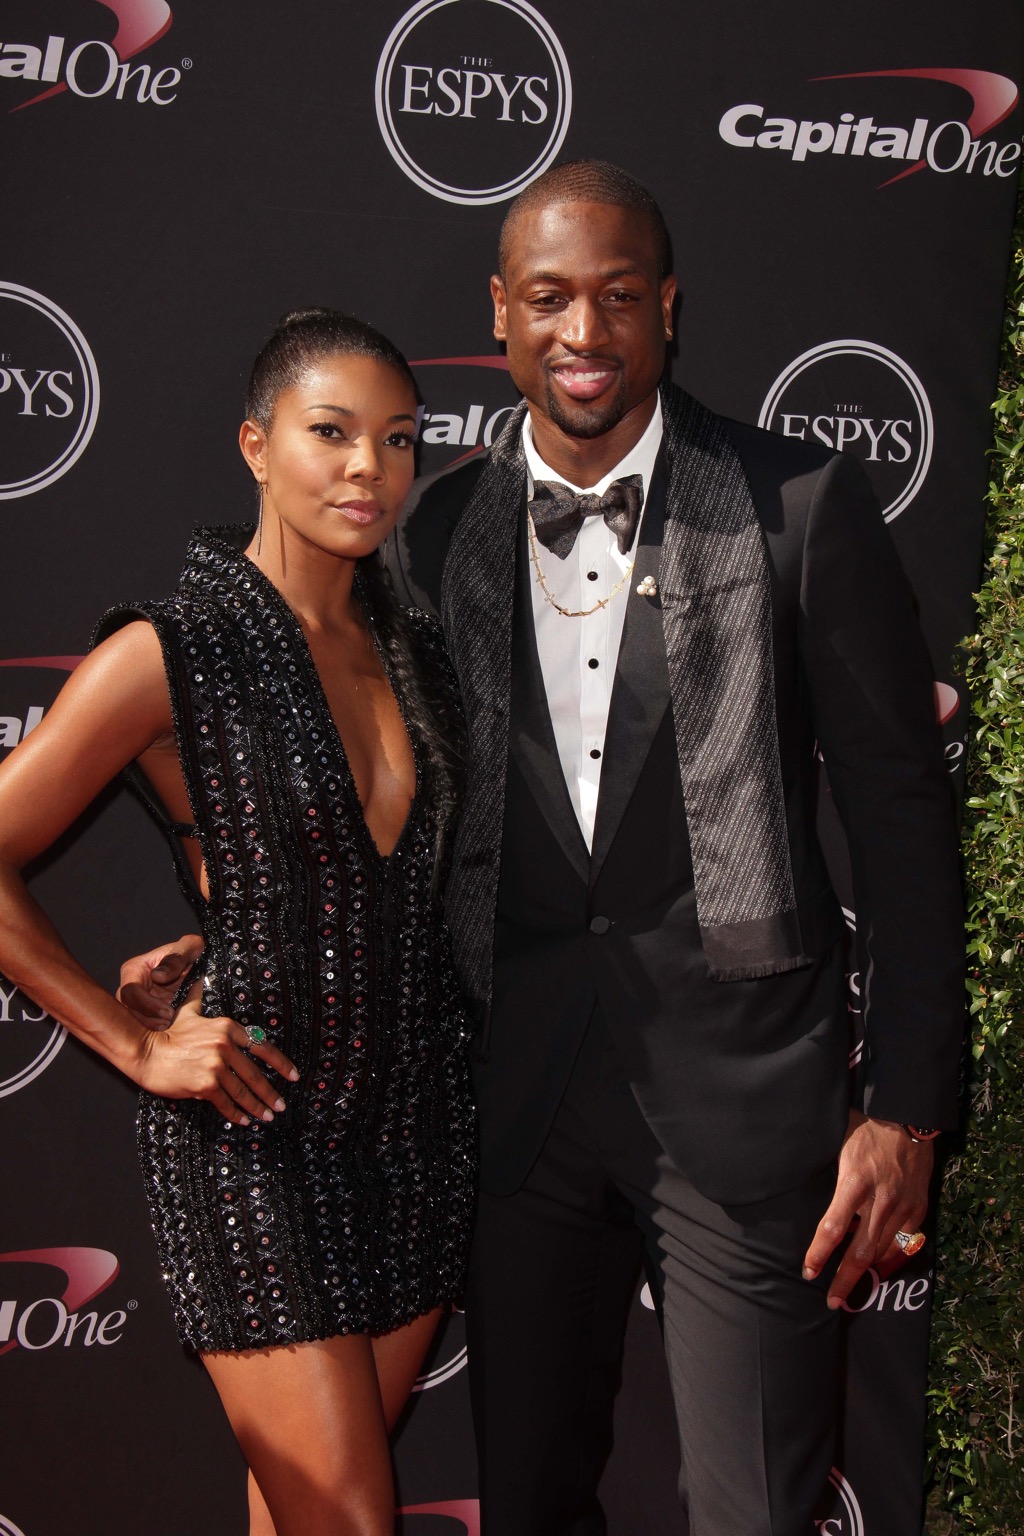 Dwayne Wade happily married